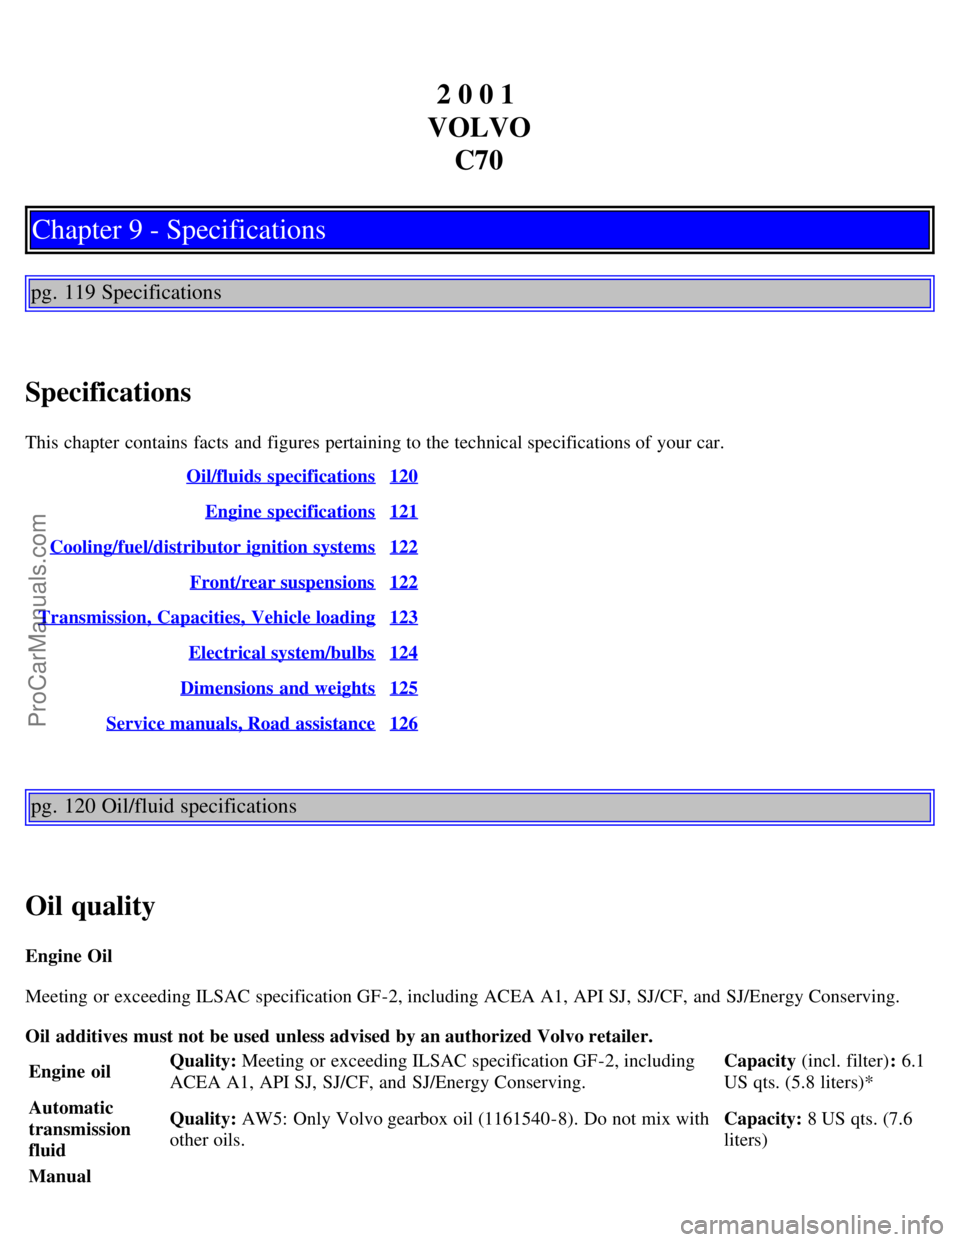 VOLVO C70 2001  Owners Manual 2 0 0 1 
VOLVO C70
Chapter 9 - Specifications
pg. 119 Specifications
Specifications
This chapter  contains facts and  figures pertaining to the technical specifications of your car. Oil/fluids  specif